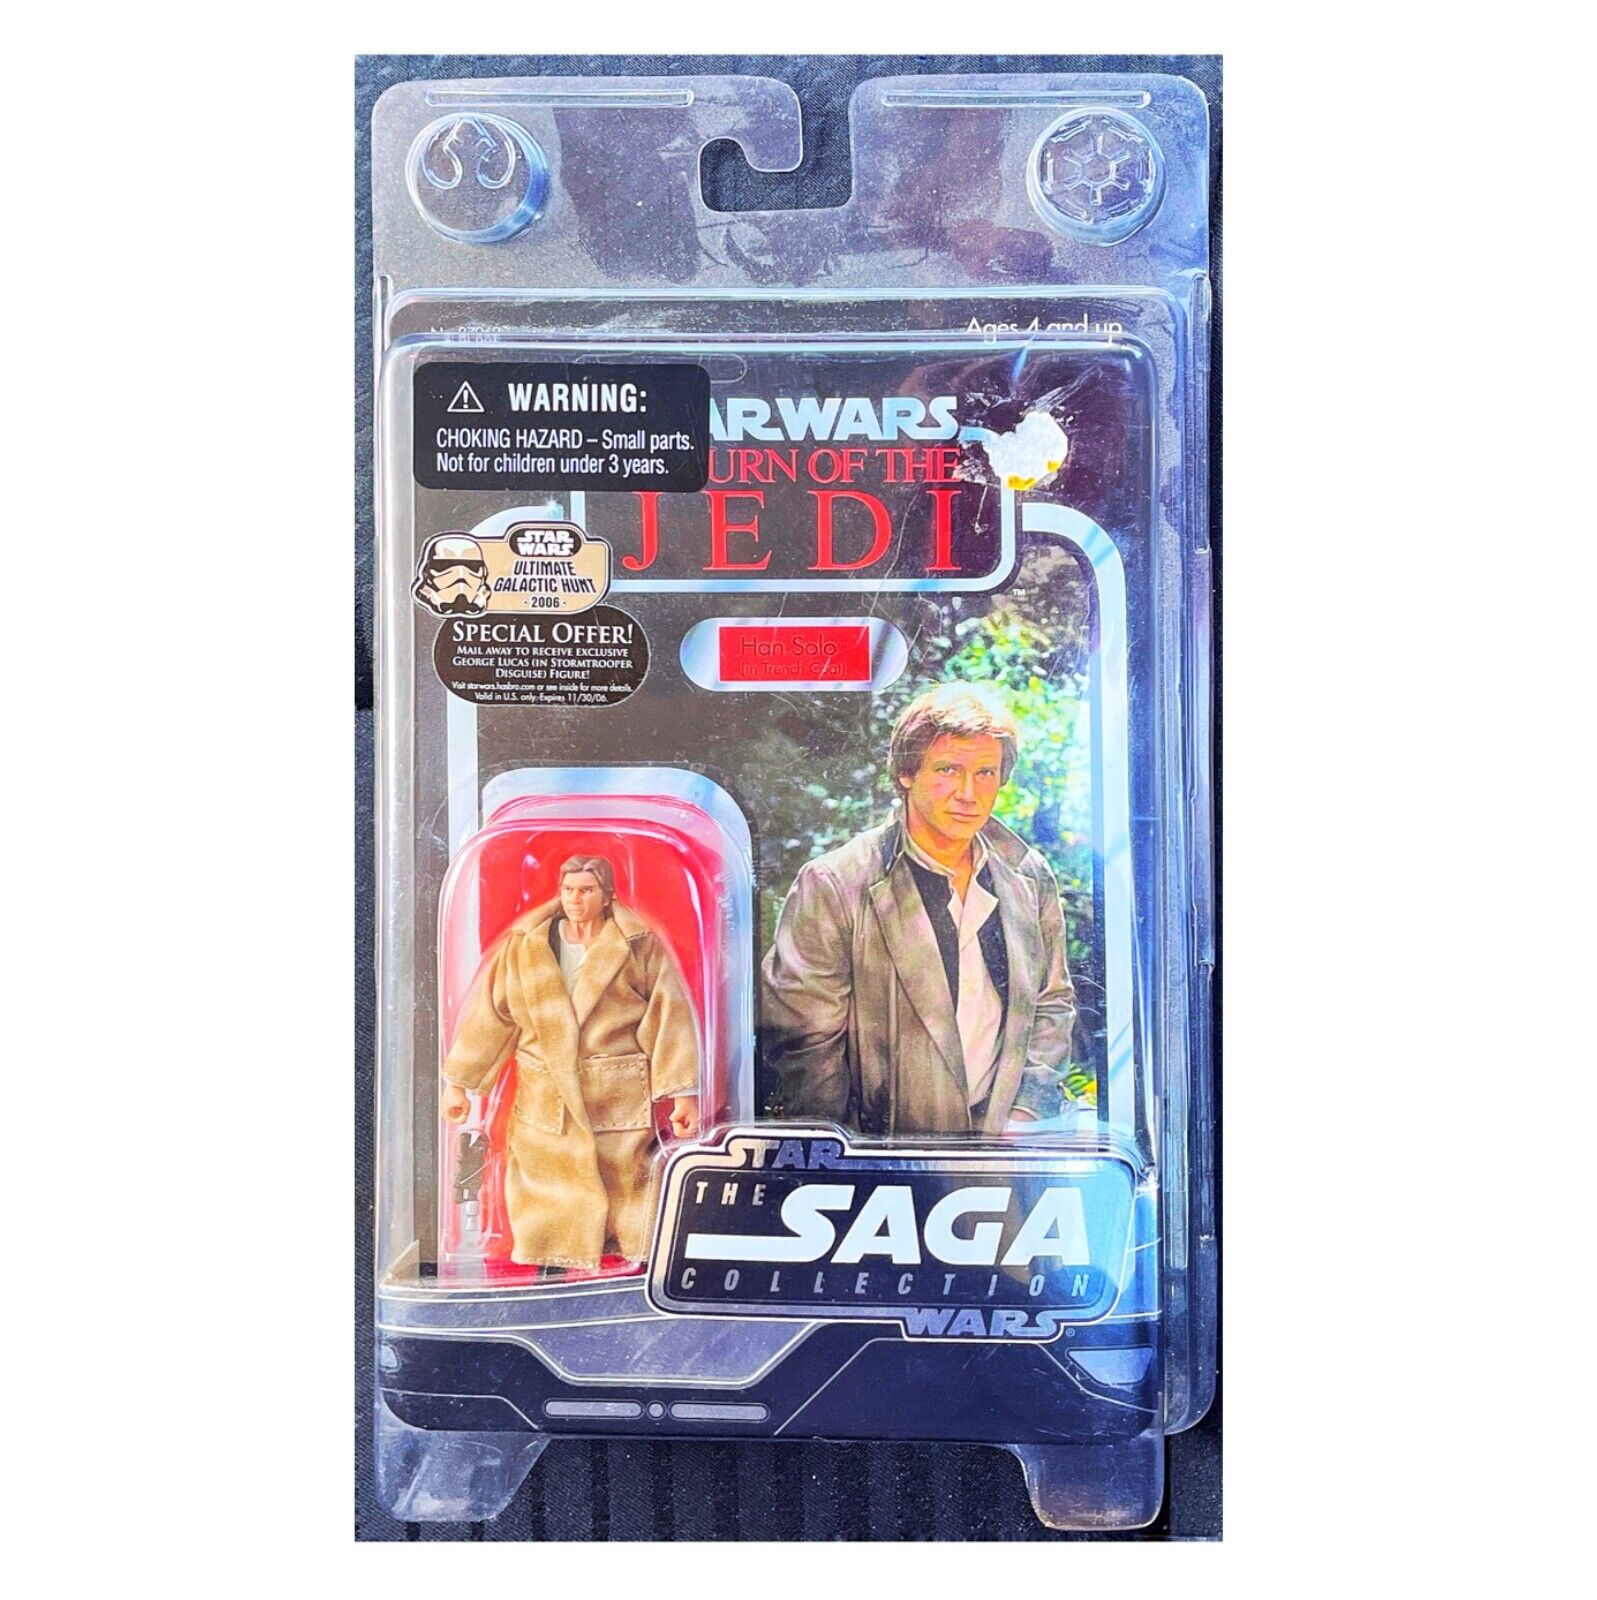 Star Wars HAN SOLO Action Figure Return of the Jedi Vtg Saga Collection 2006 New Hasbro Han Solo in Trench Coat